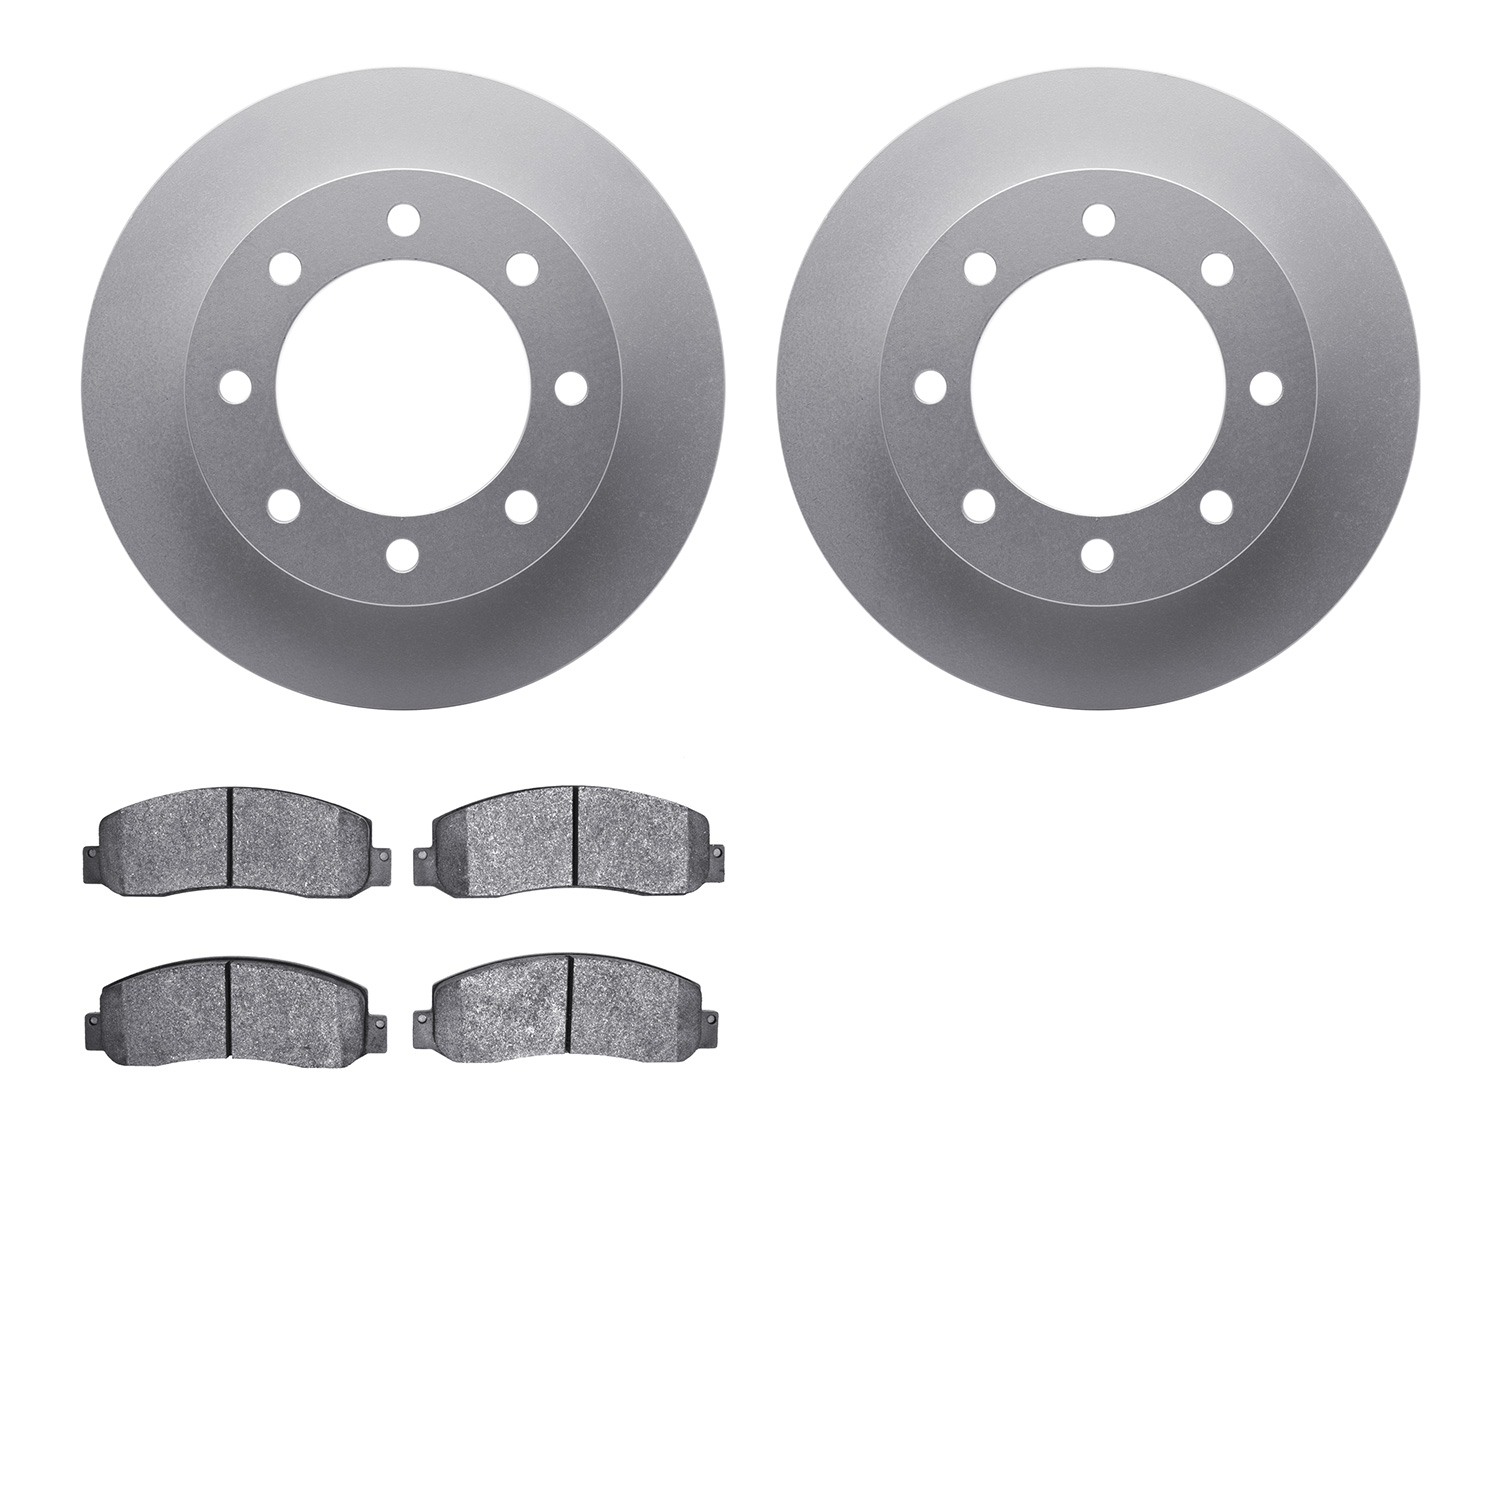 4402-54053 Geospec Brake Rotors with Ultimate-Duty Brake Pads Kit, 2005-2011 Ford/Lincoln/Mercury/Mazda, Position: Front